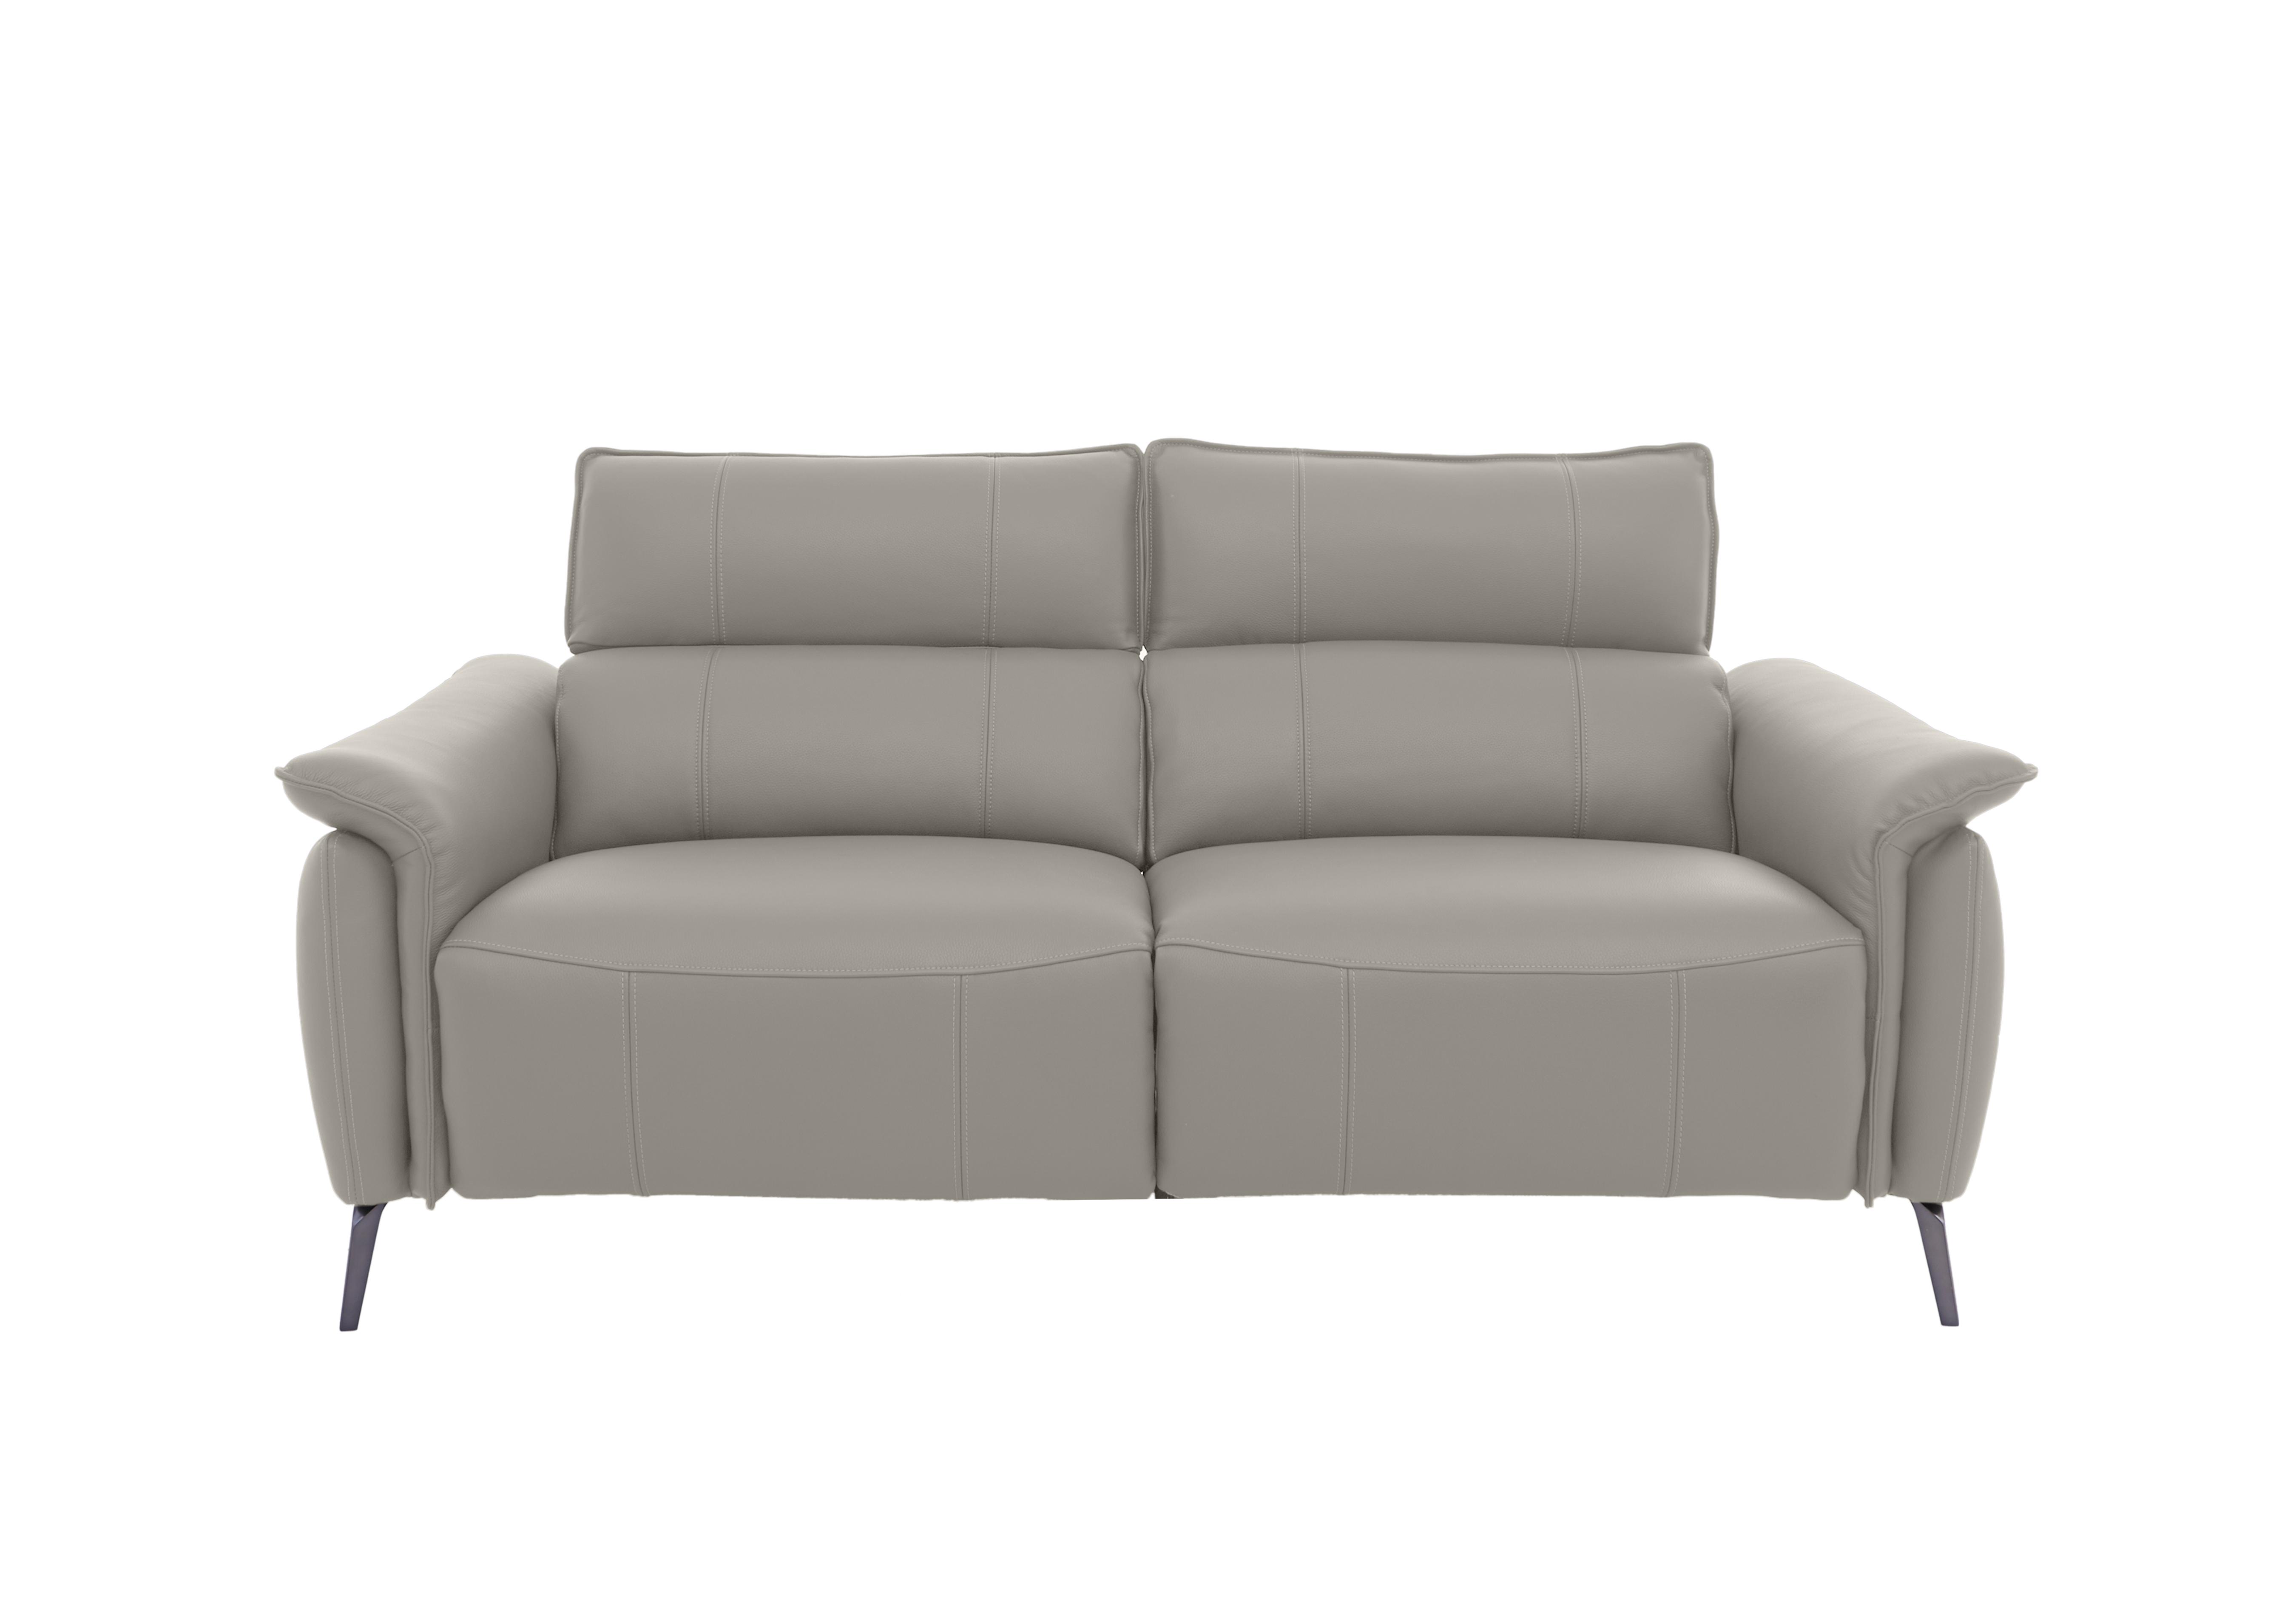 Jude 3 Seater Leather Sofa in Montana New Grey Cat-60/28 on Furniture Village